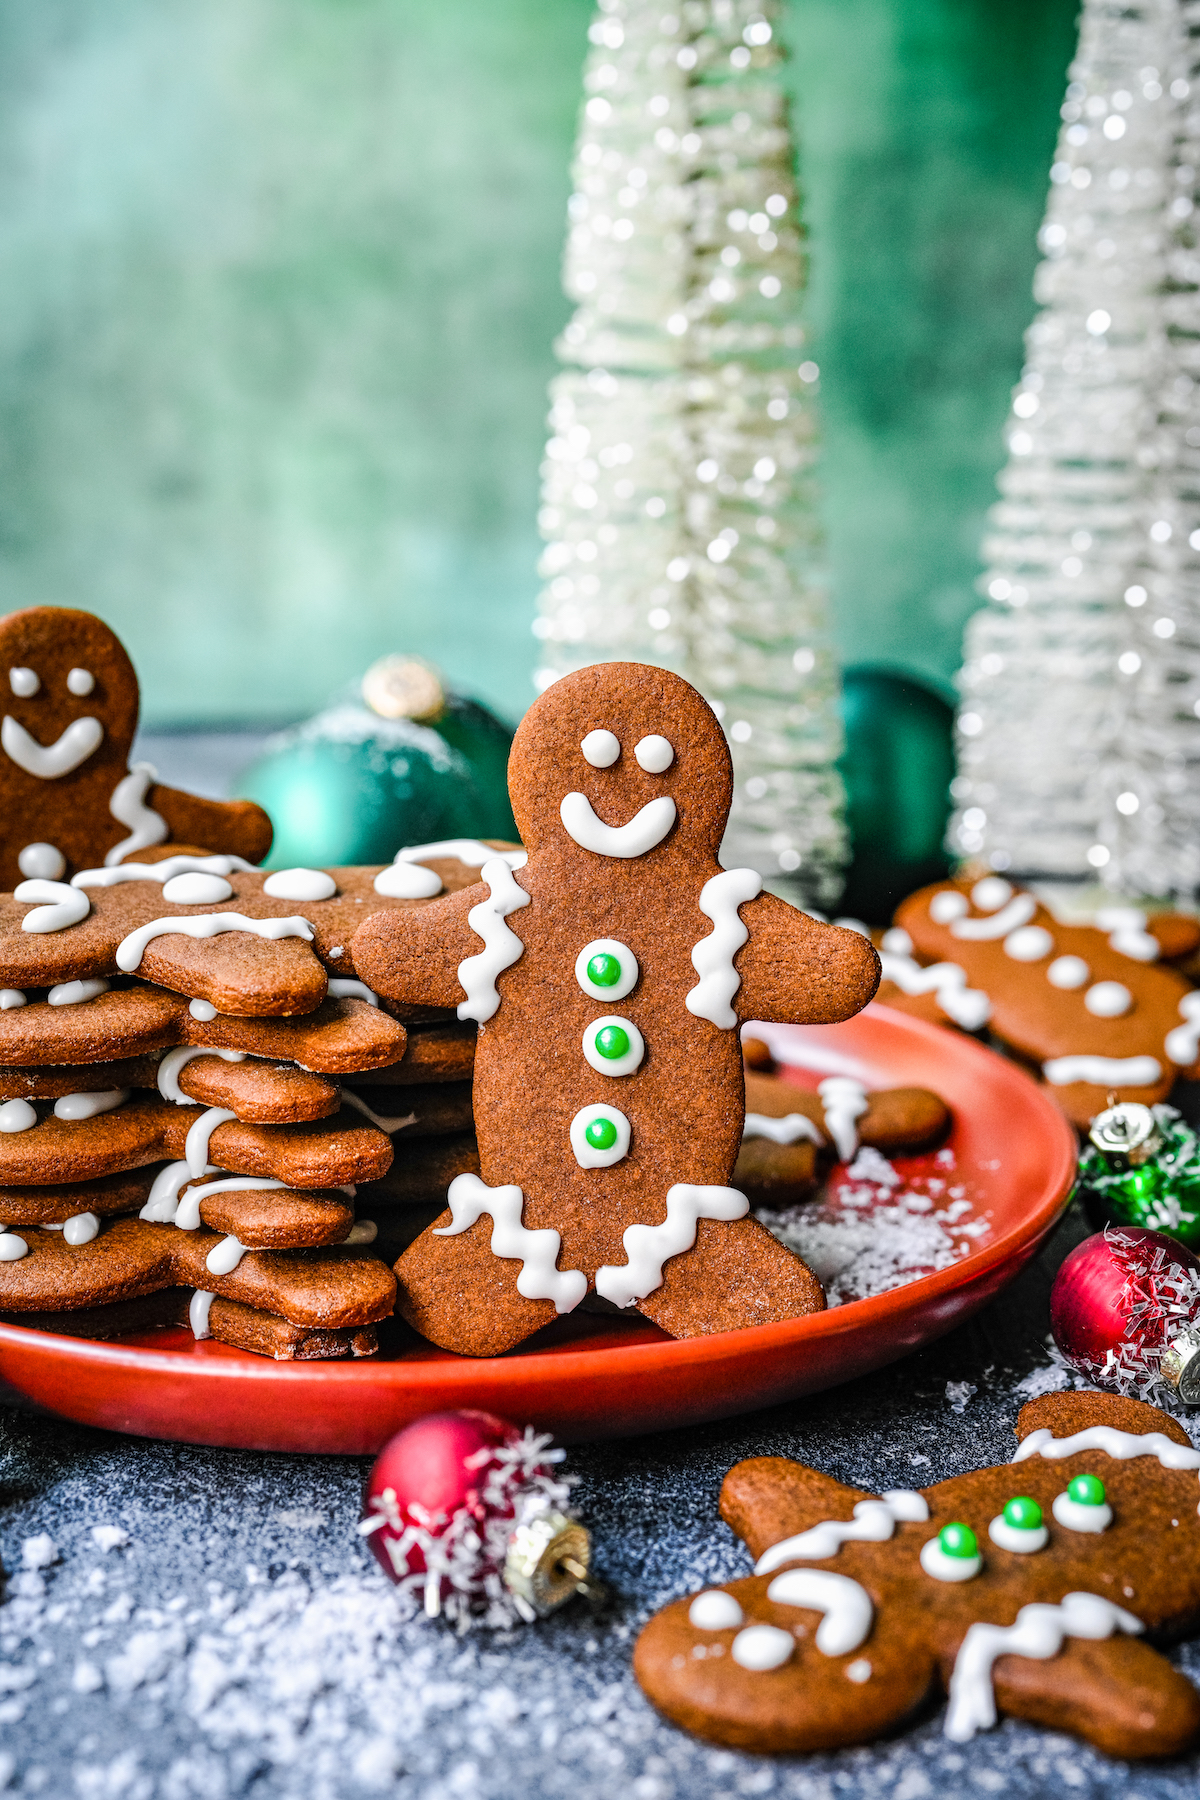 A plate of gingerbread cookies. One is standing up against a stack of other cookies, showing the royal icing details.